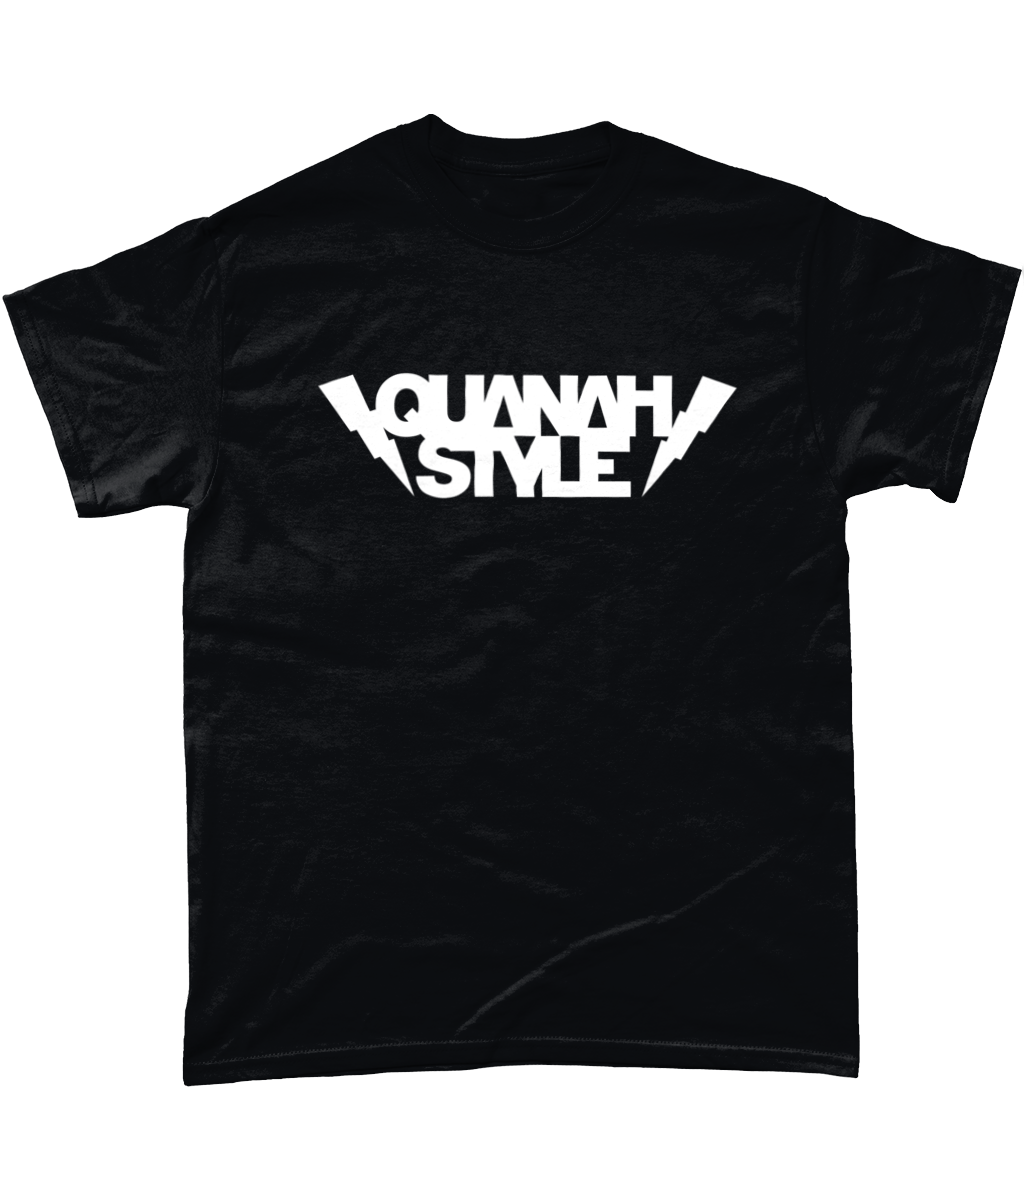 Quanah Style - White Logo T-Shirt - SNATCHED MERCH